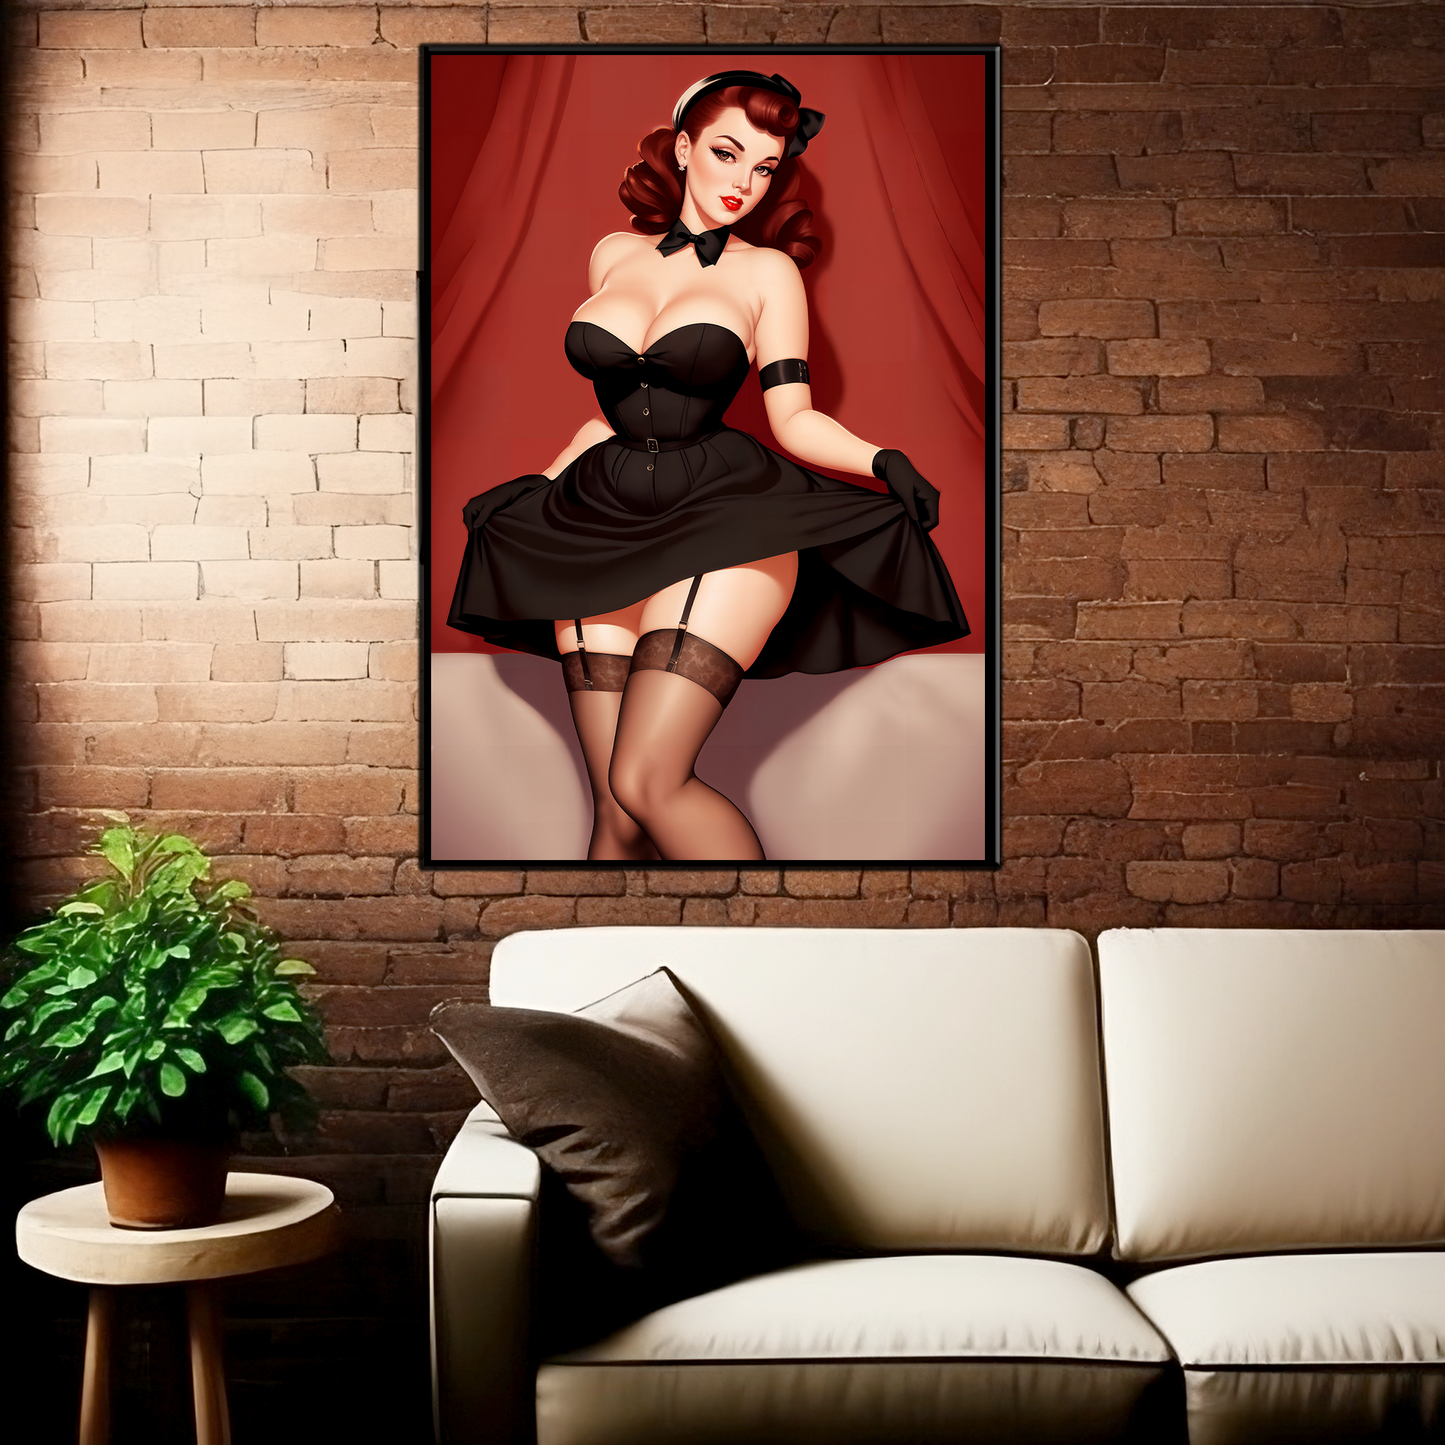 The Daily Pinup #101 - Pulp Beauty Wall Art